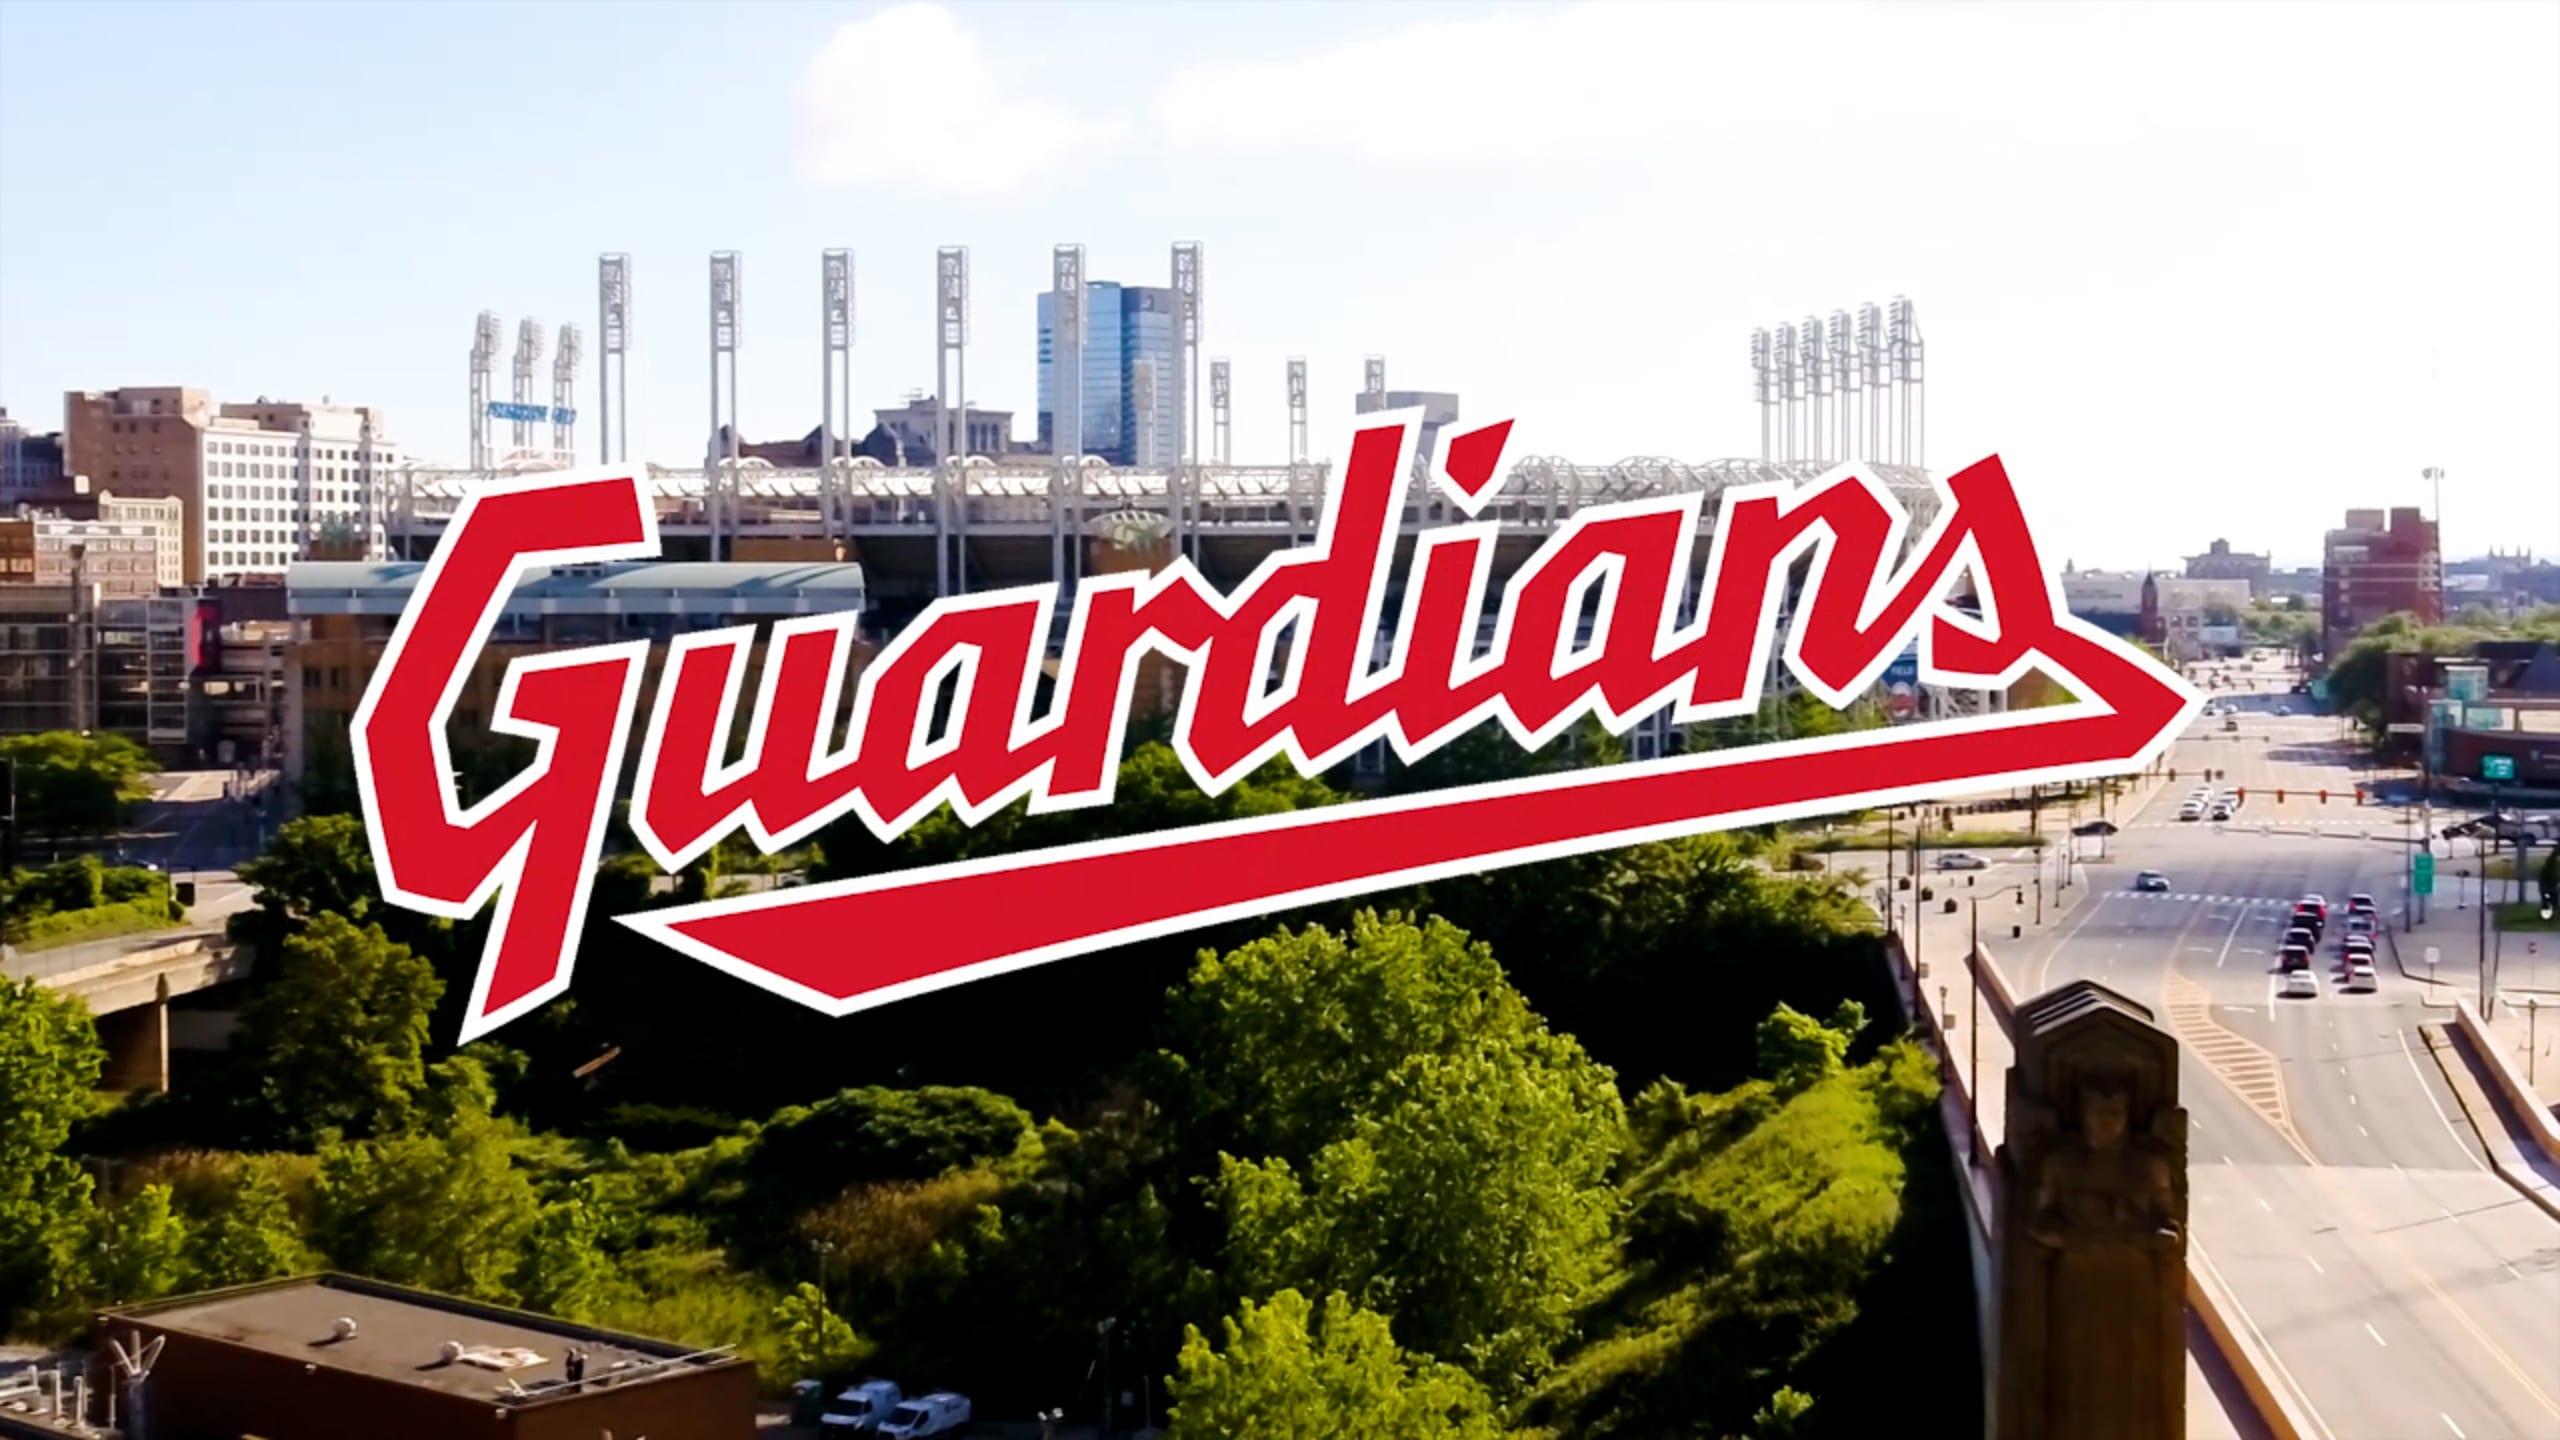 Why the Cleveland Guardians? The meaning behind the franchise's new name